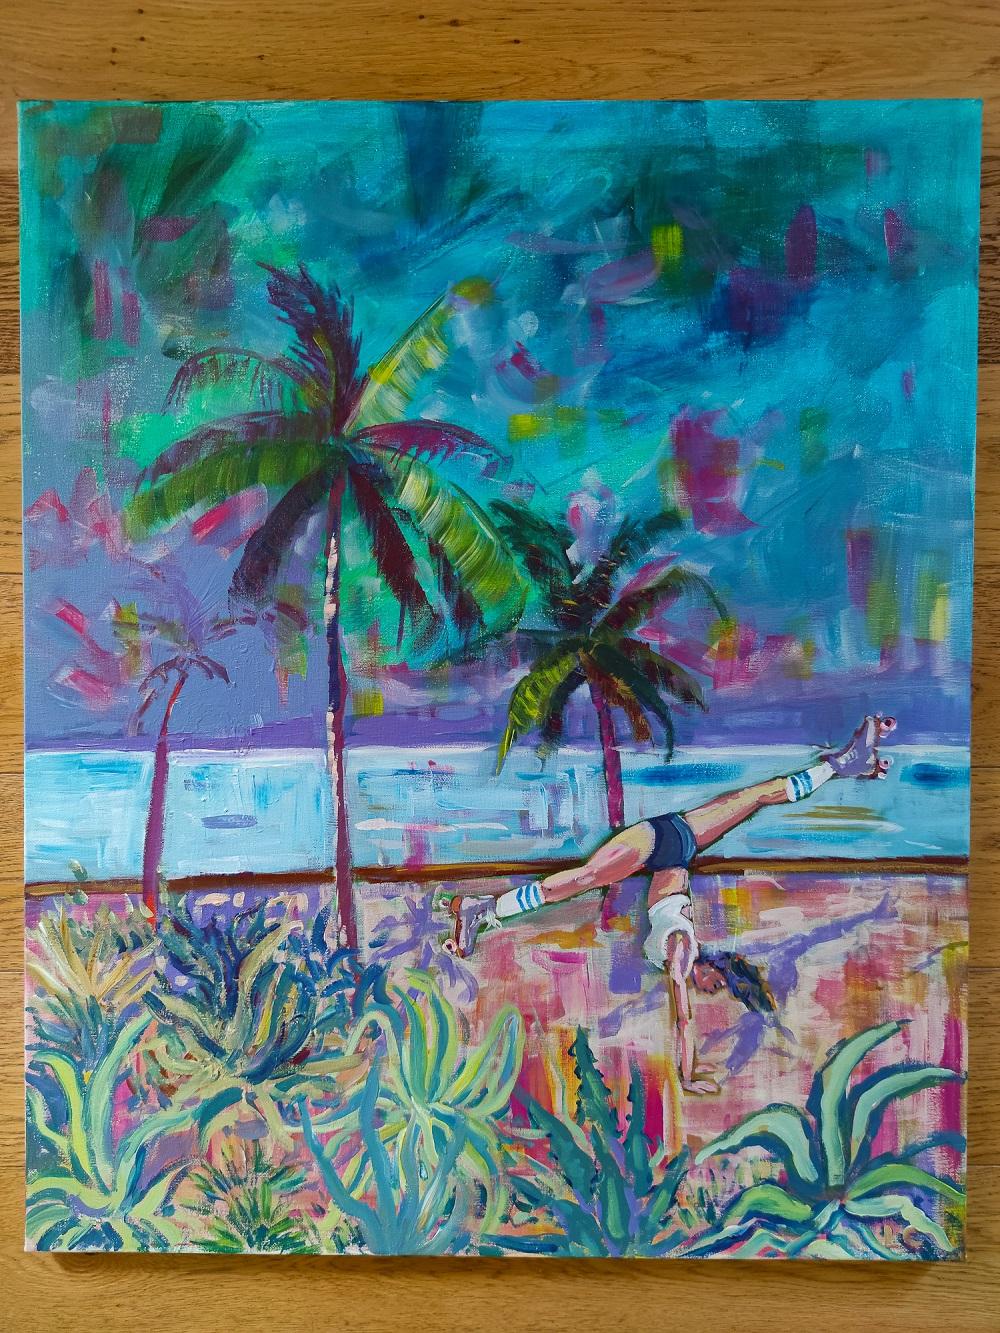 Strech the Noise - Fauvist Painting by Linda Clerget